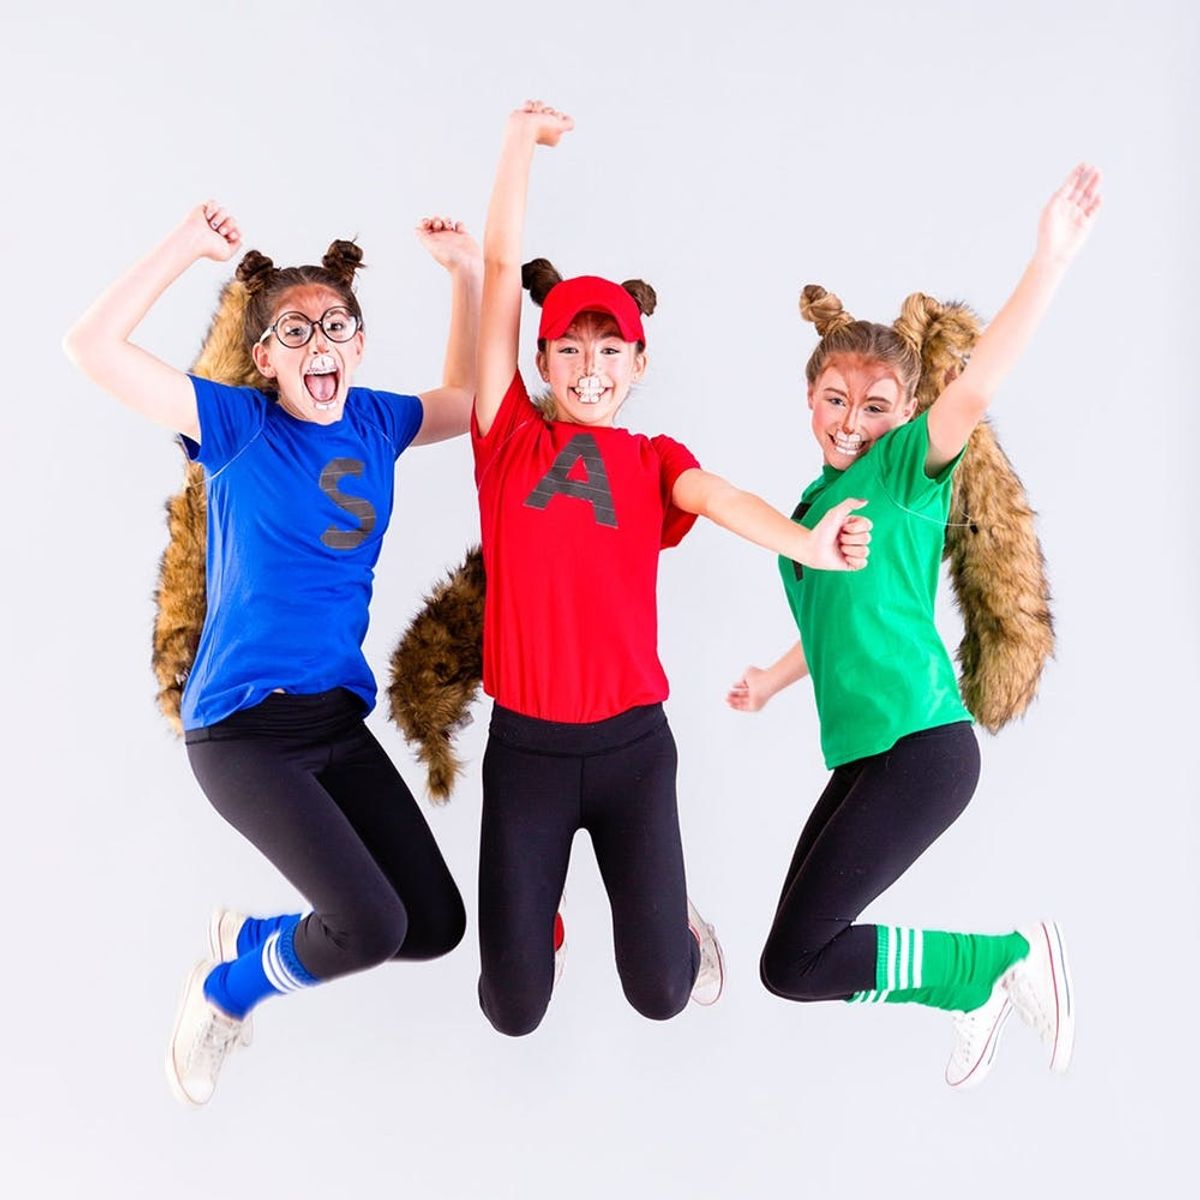 This Alvin and the Chipmunks Costume is a Perfect Group Youth Costume